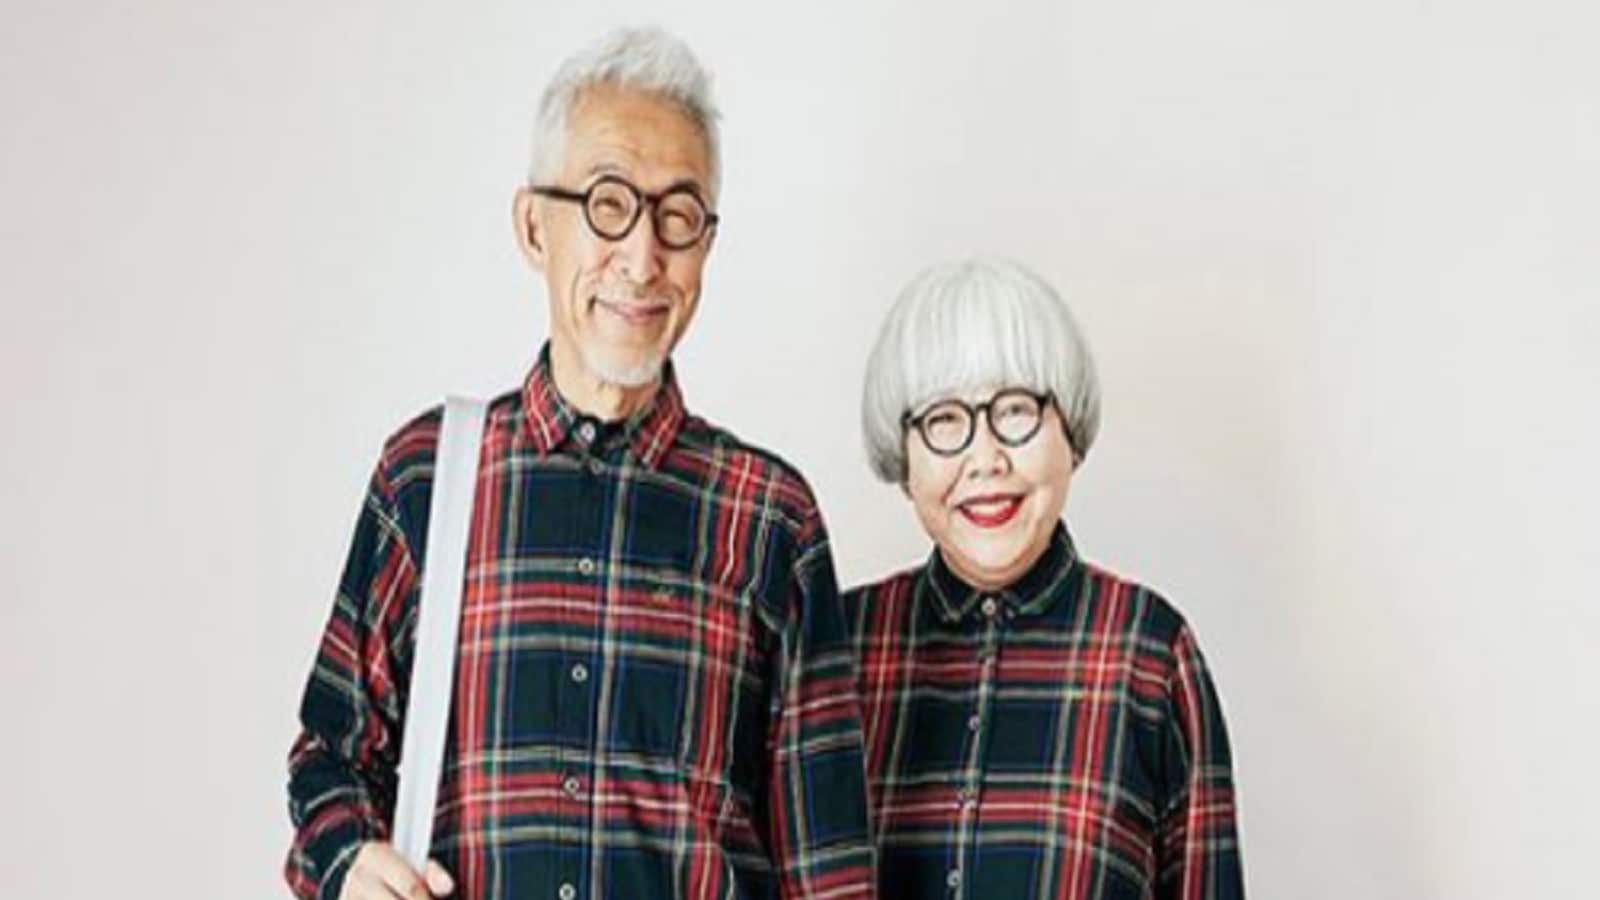 This Elderly Japanese Couple in Matching Outfits is Giving Major Relationship Goals